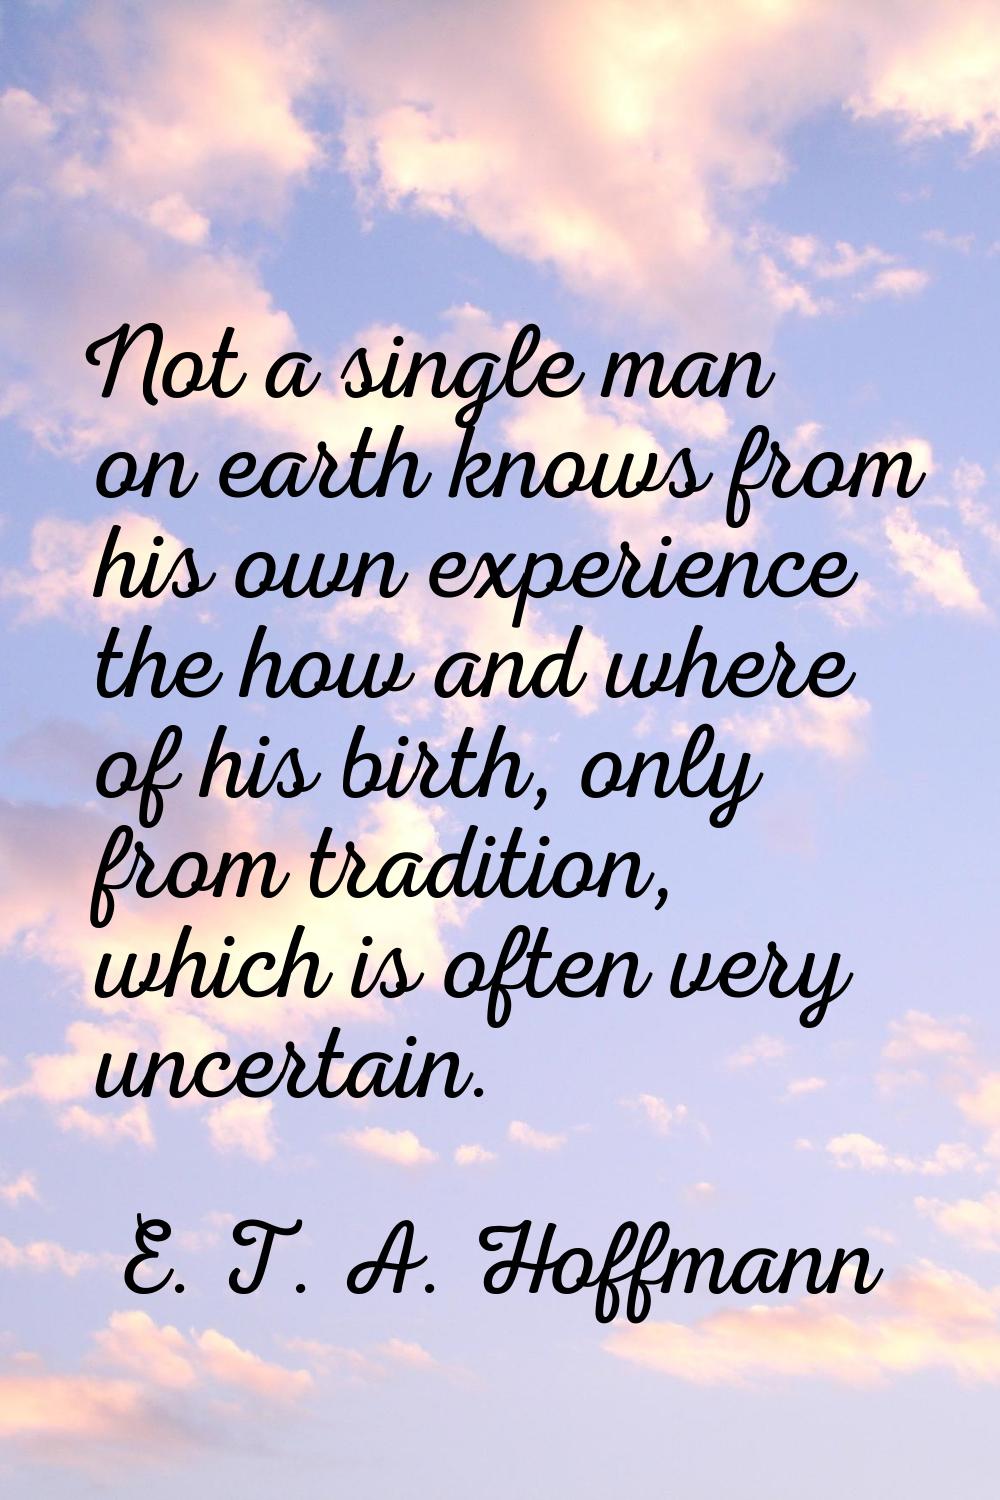 Not a single man on earth knows from his own experience the how and where of his birth, only from t